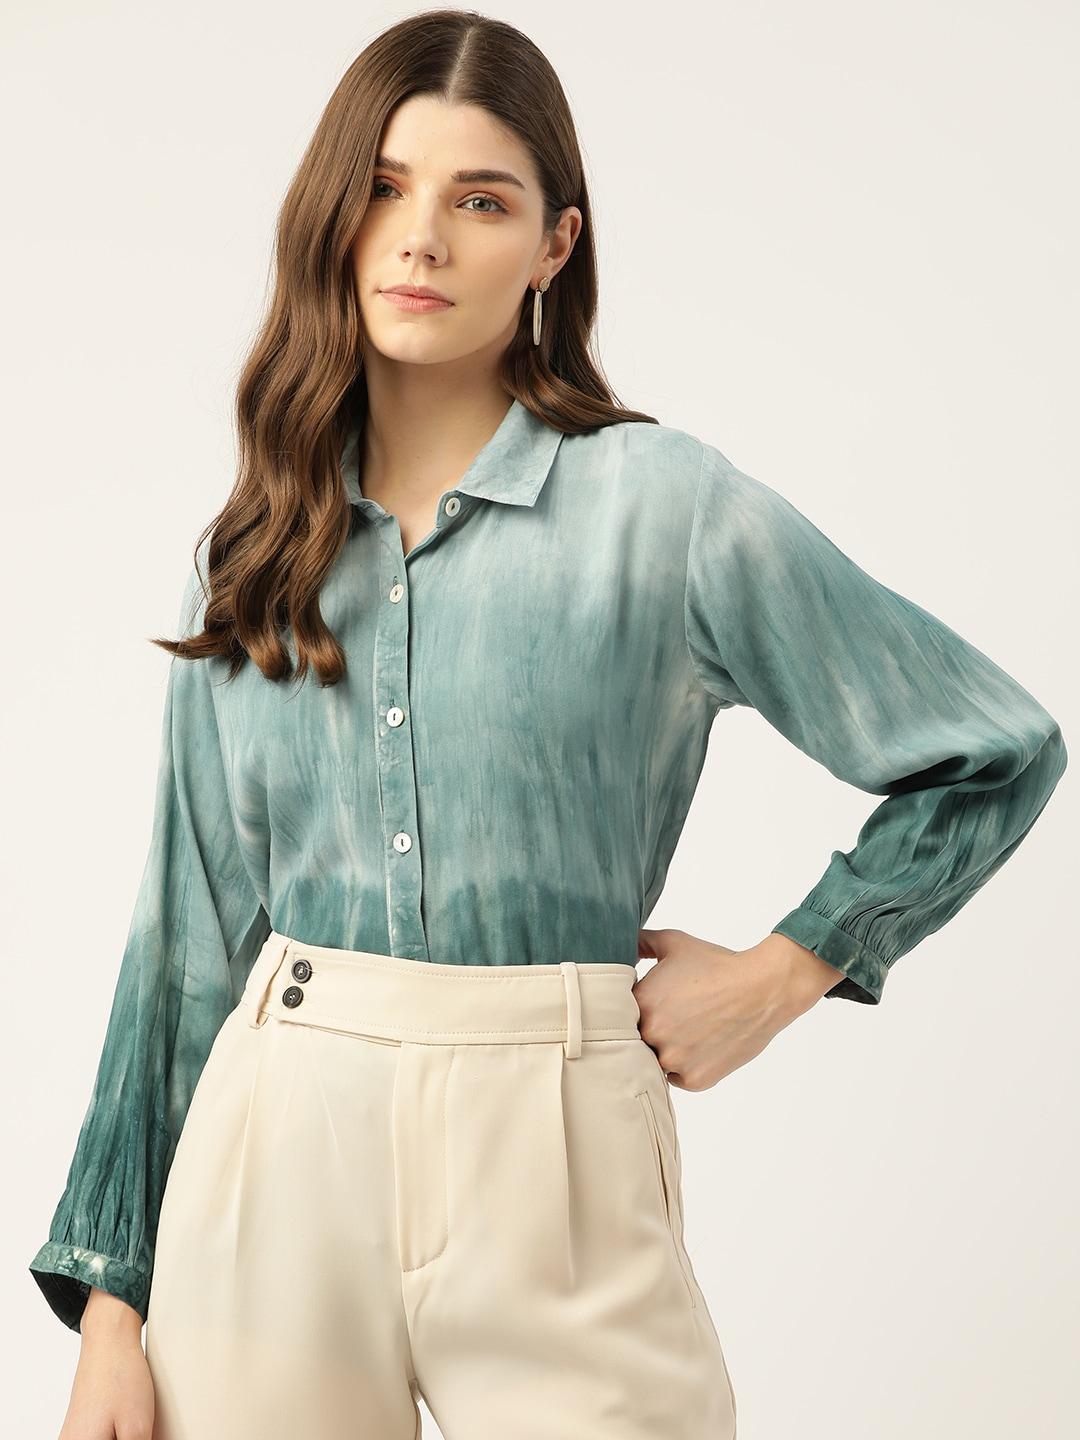 maaesa-green-&-off-white-tie-and-dye-shirt-style-top